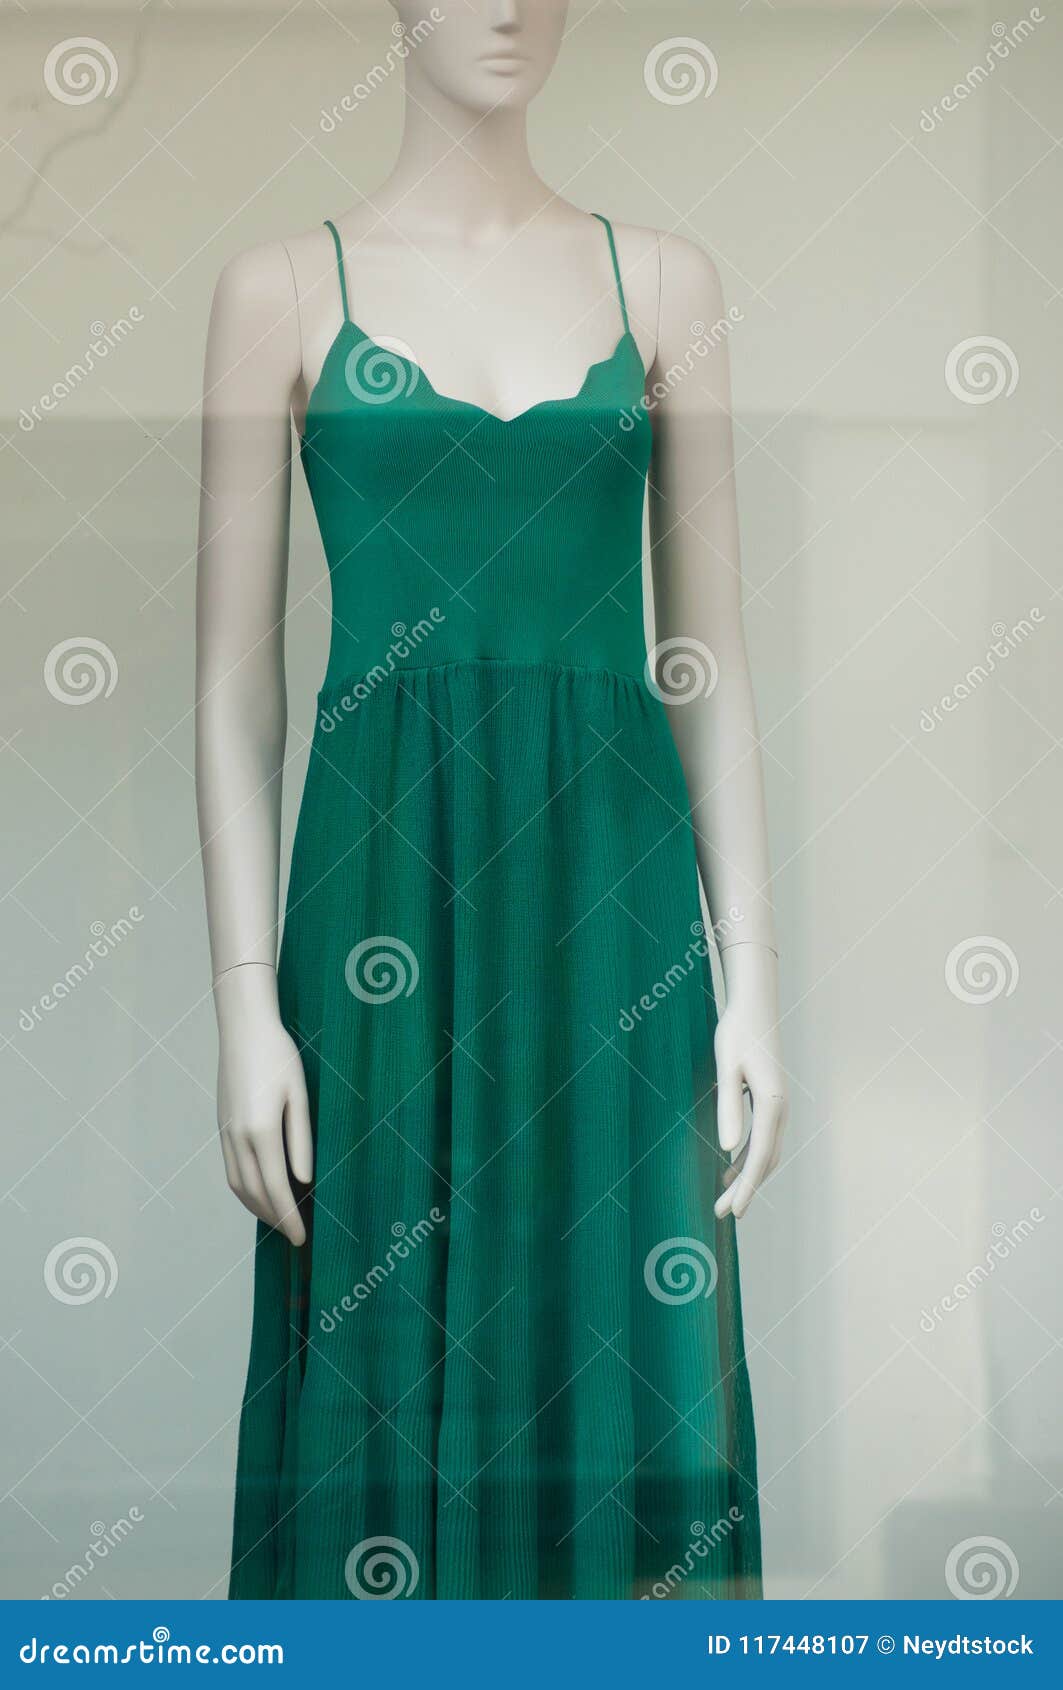 Green Summer Dress on Mannequin in Fashion Store Show Stock Image ...